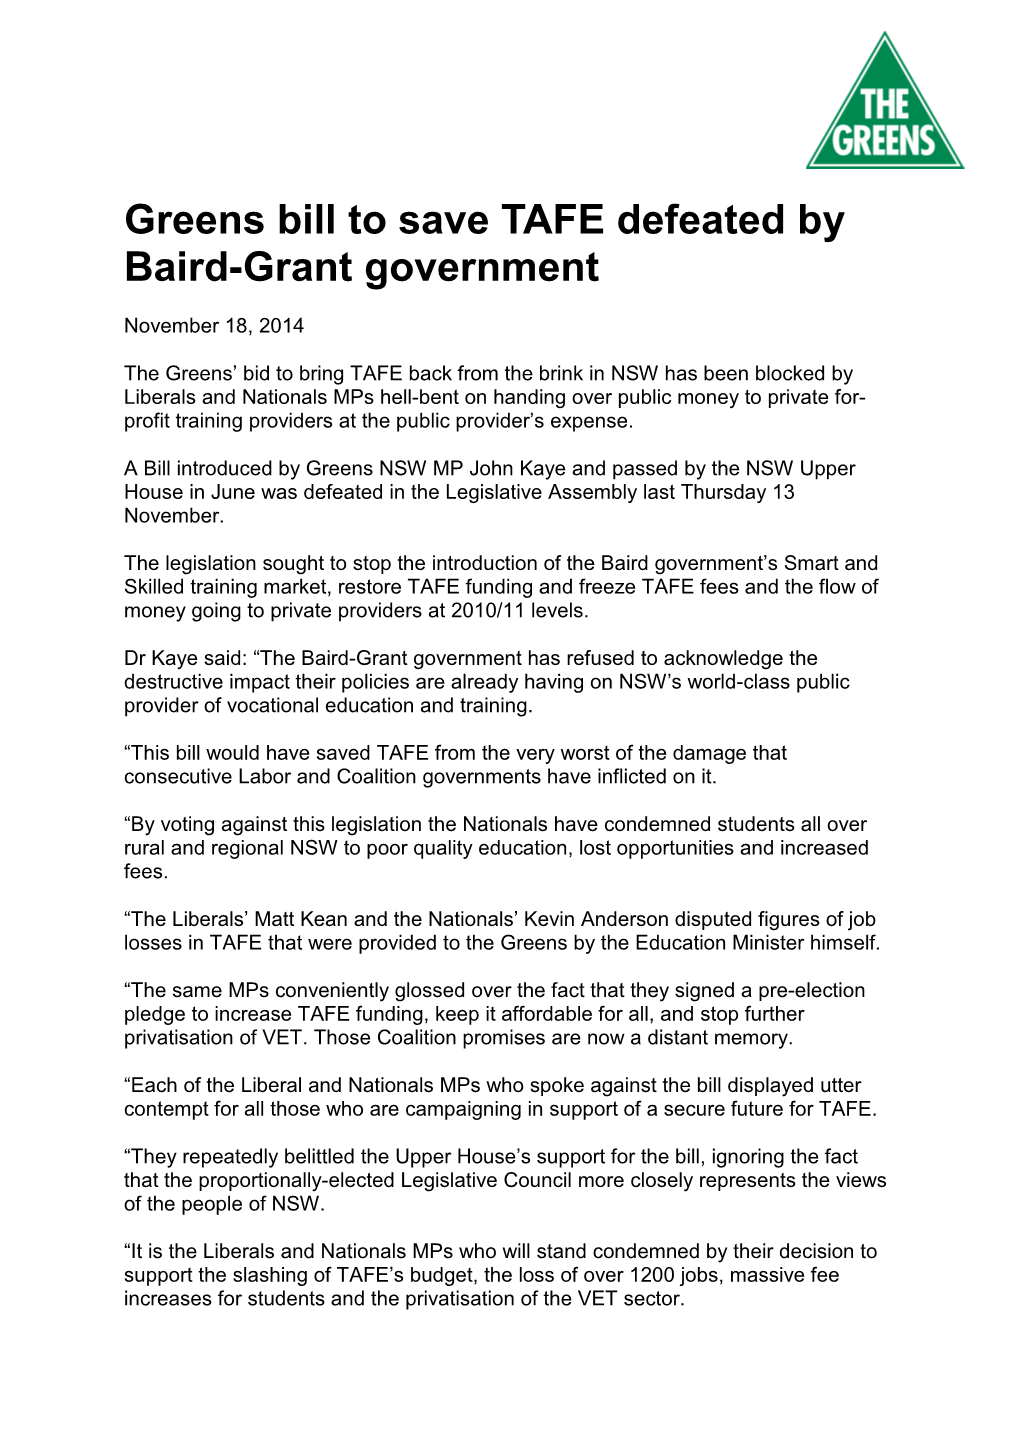 Greens Bill to Save TAFE Defeated by Baird-Grant Government